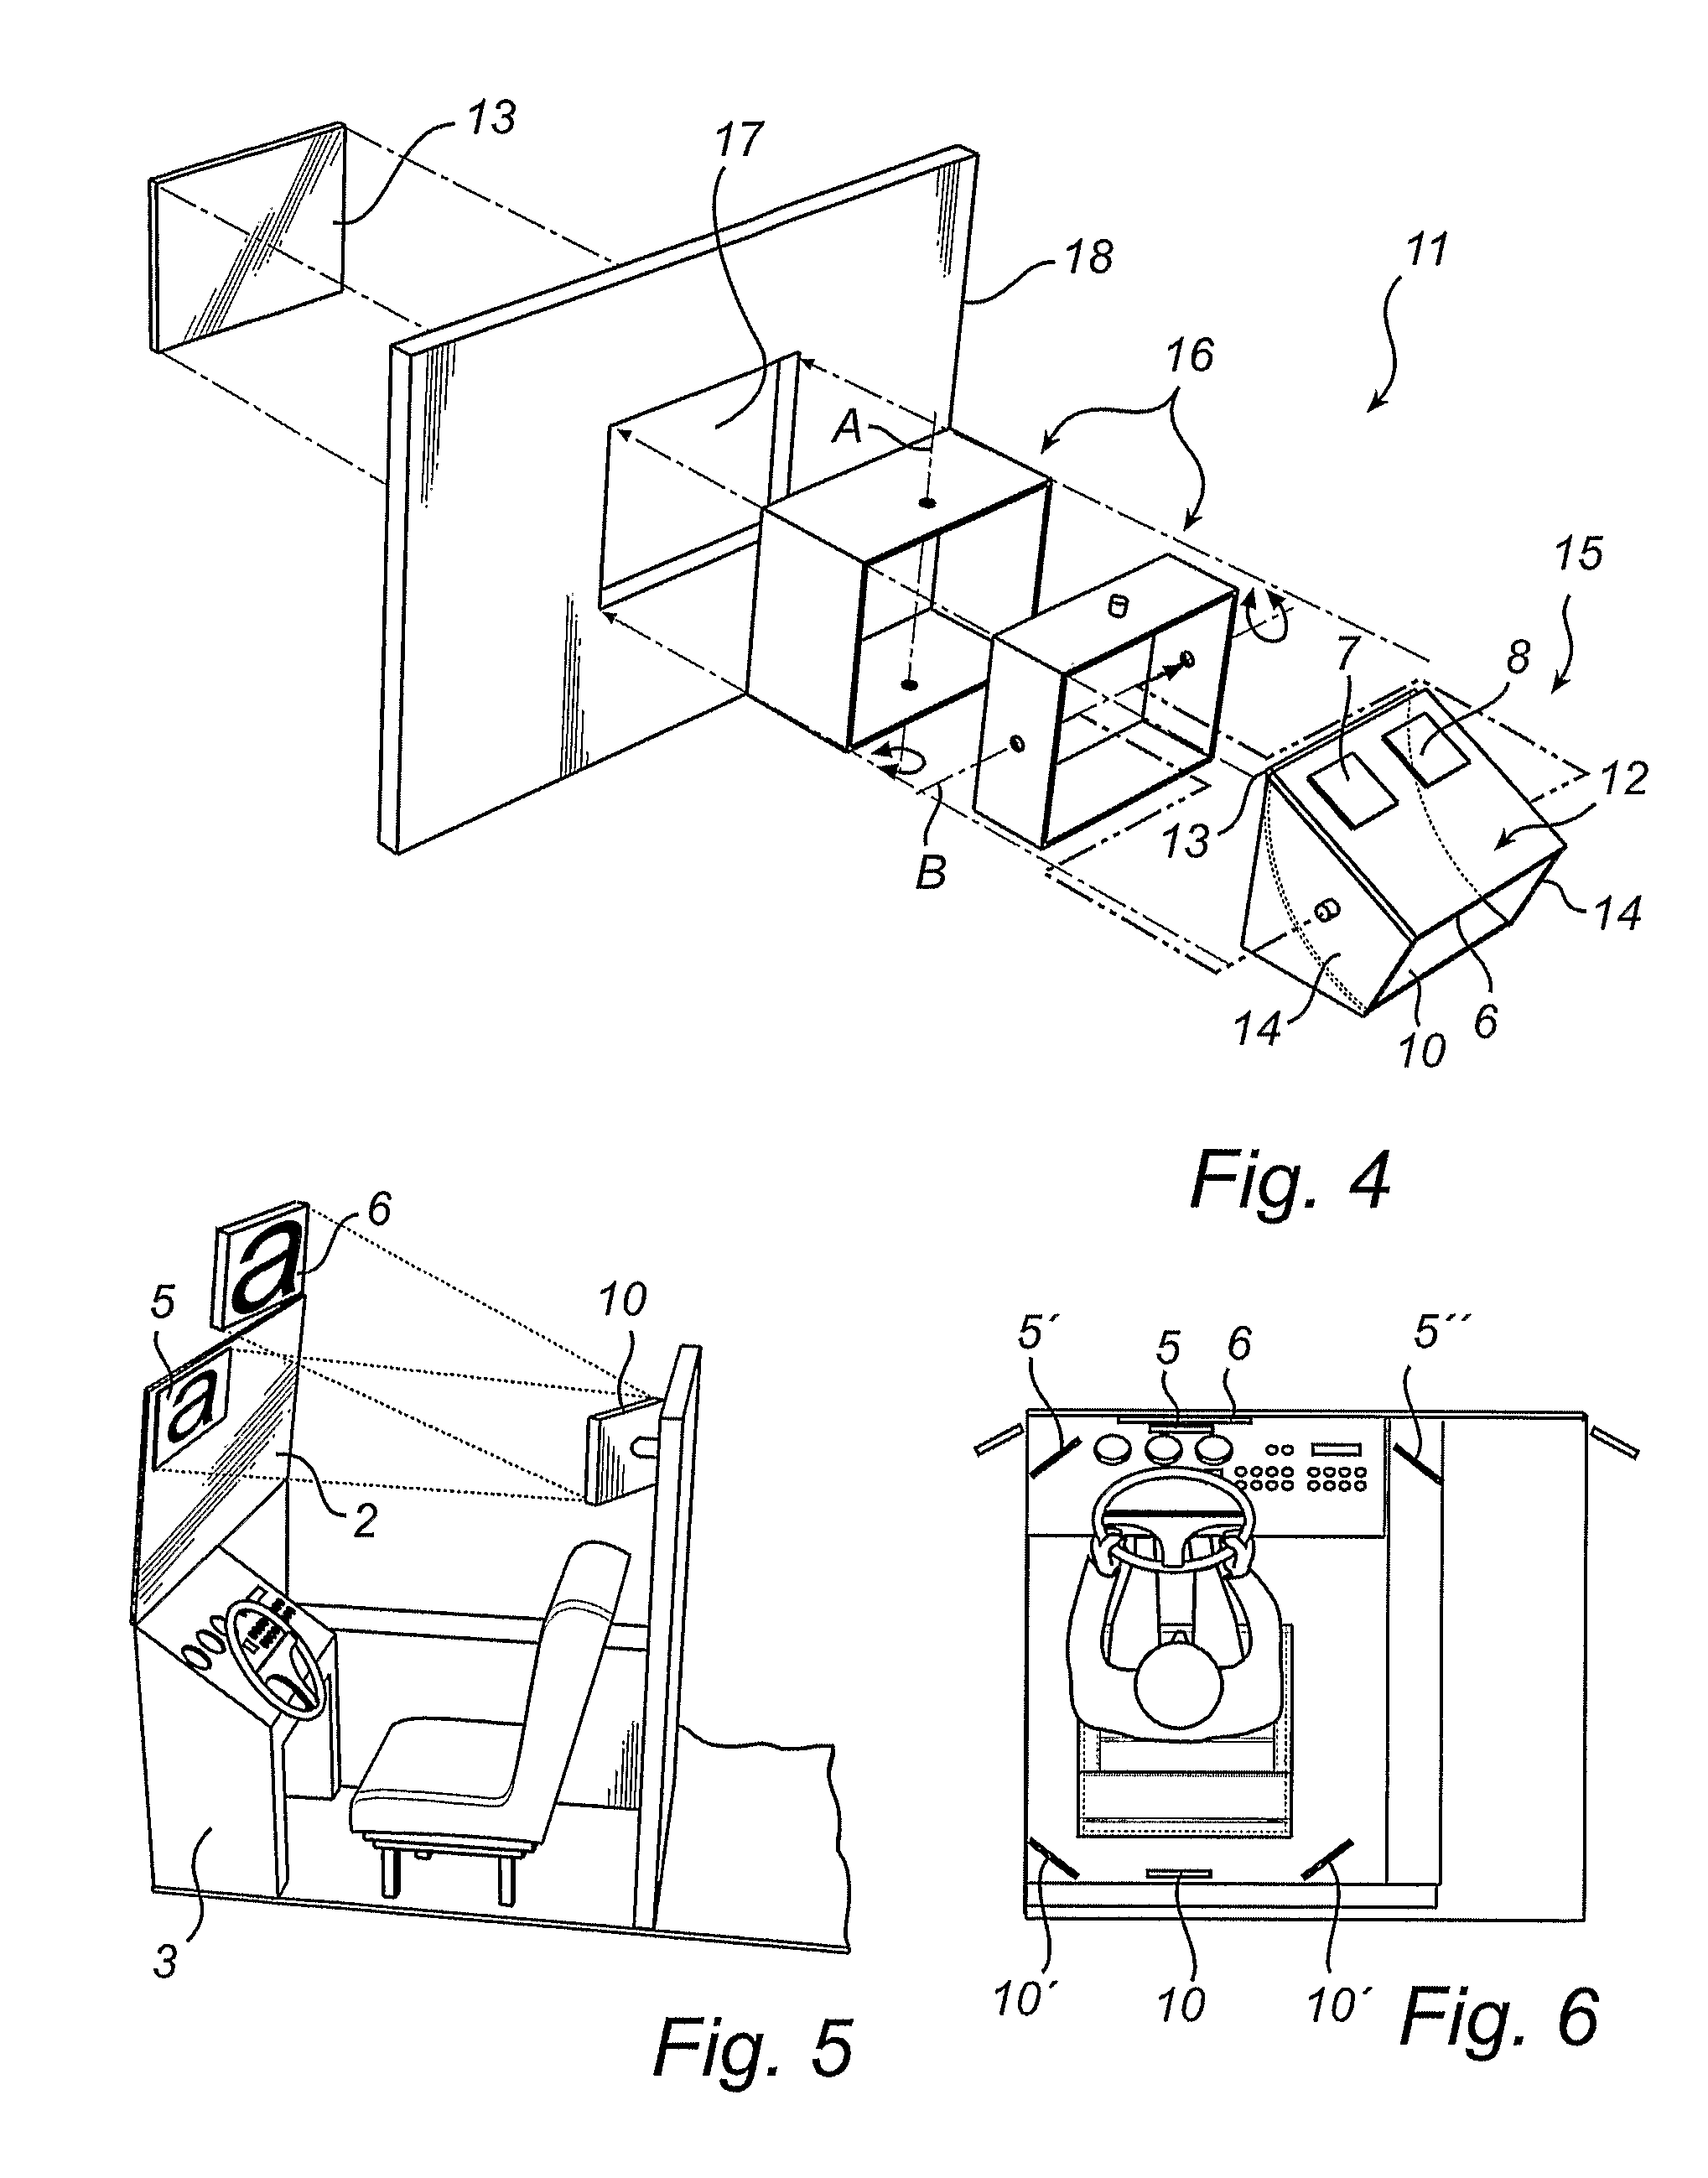 Device and System for Display of Information, and Vehicle Equipped with Such a System